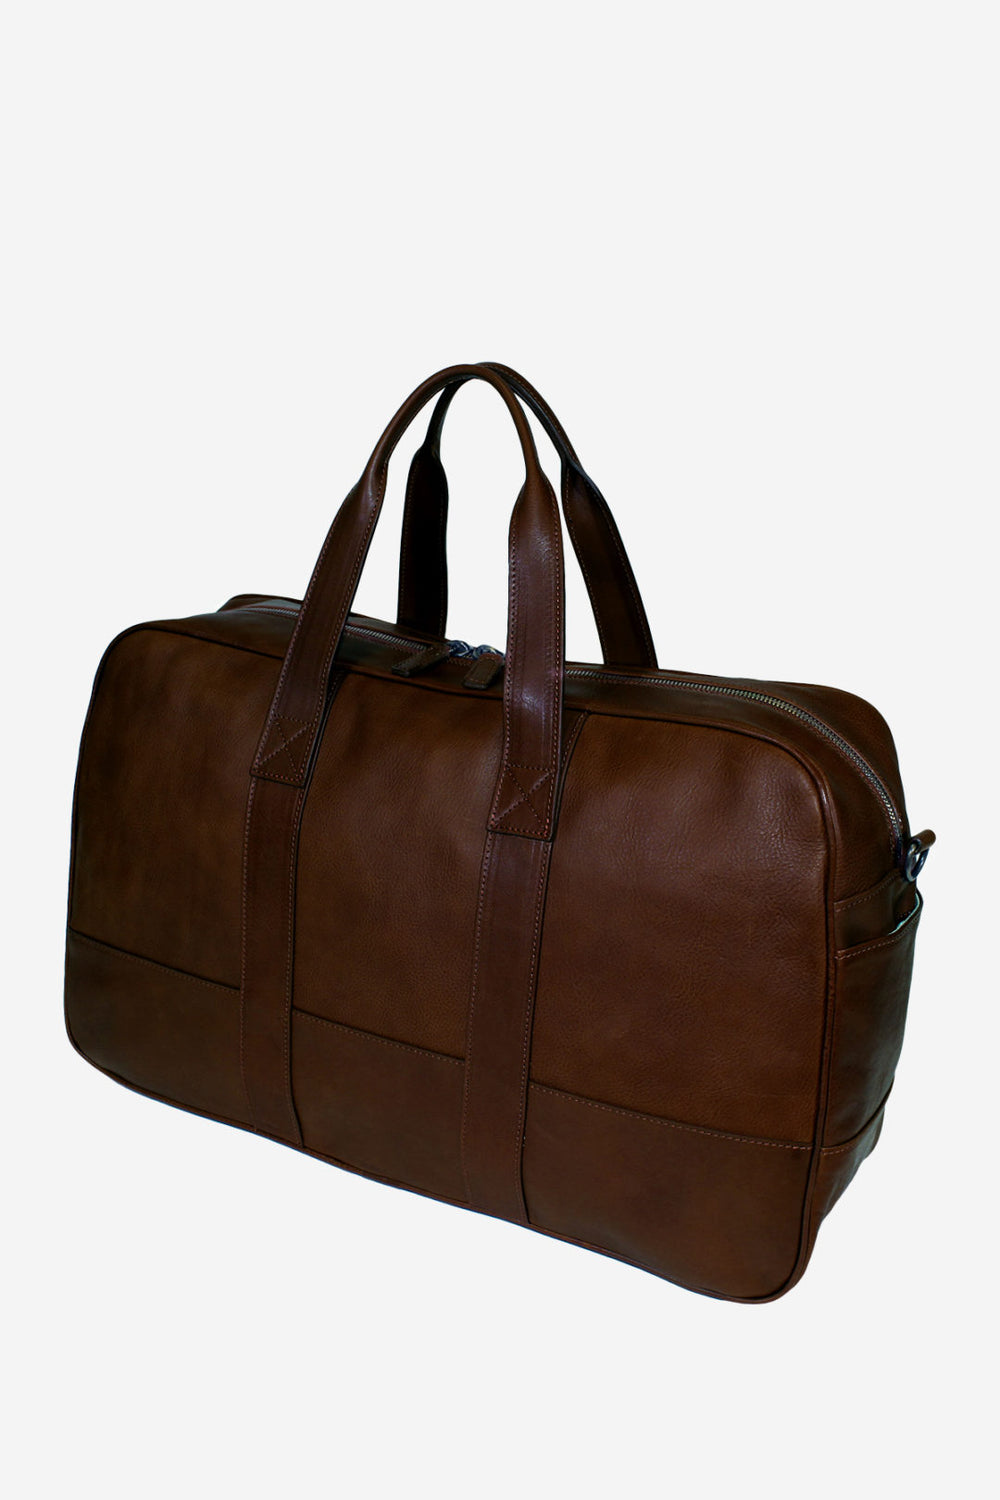 Travel Bags for Men, Polo Travel Luggage for Sale